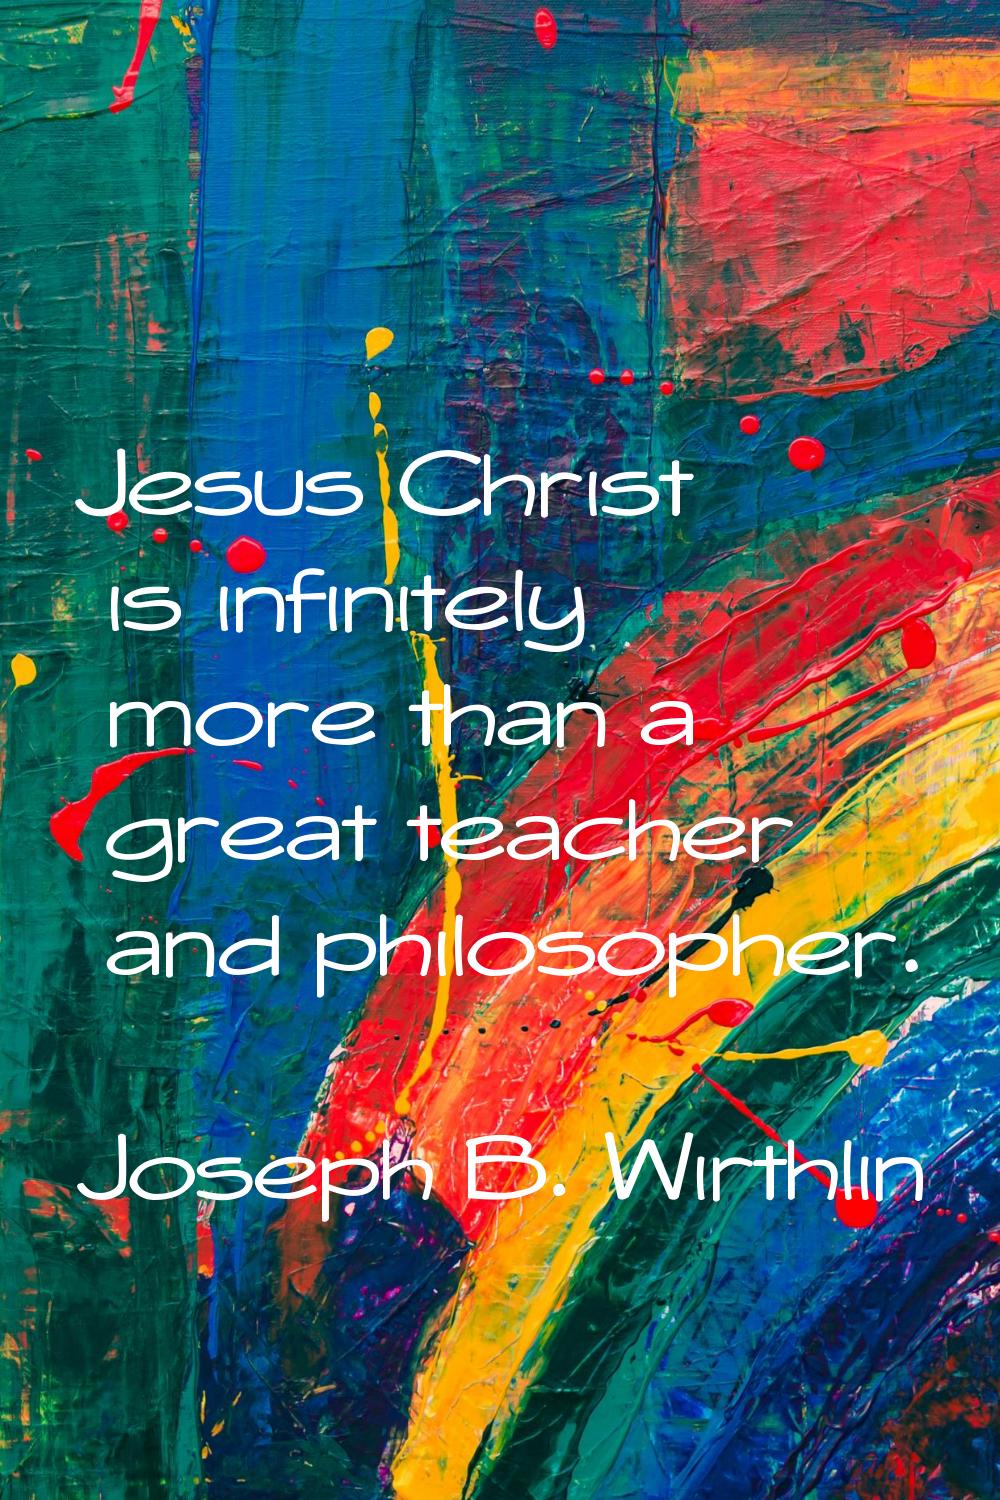 Jesus Christ is infinitely more than a great teacher and philosopher.